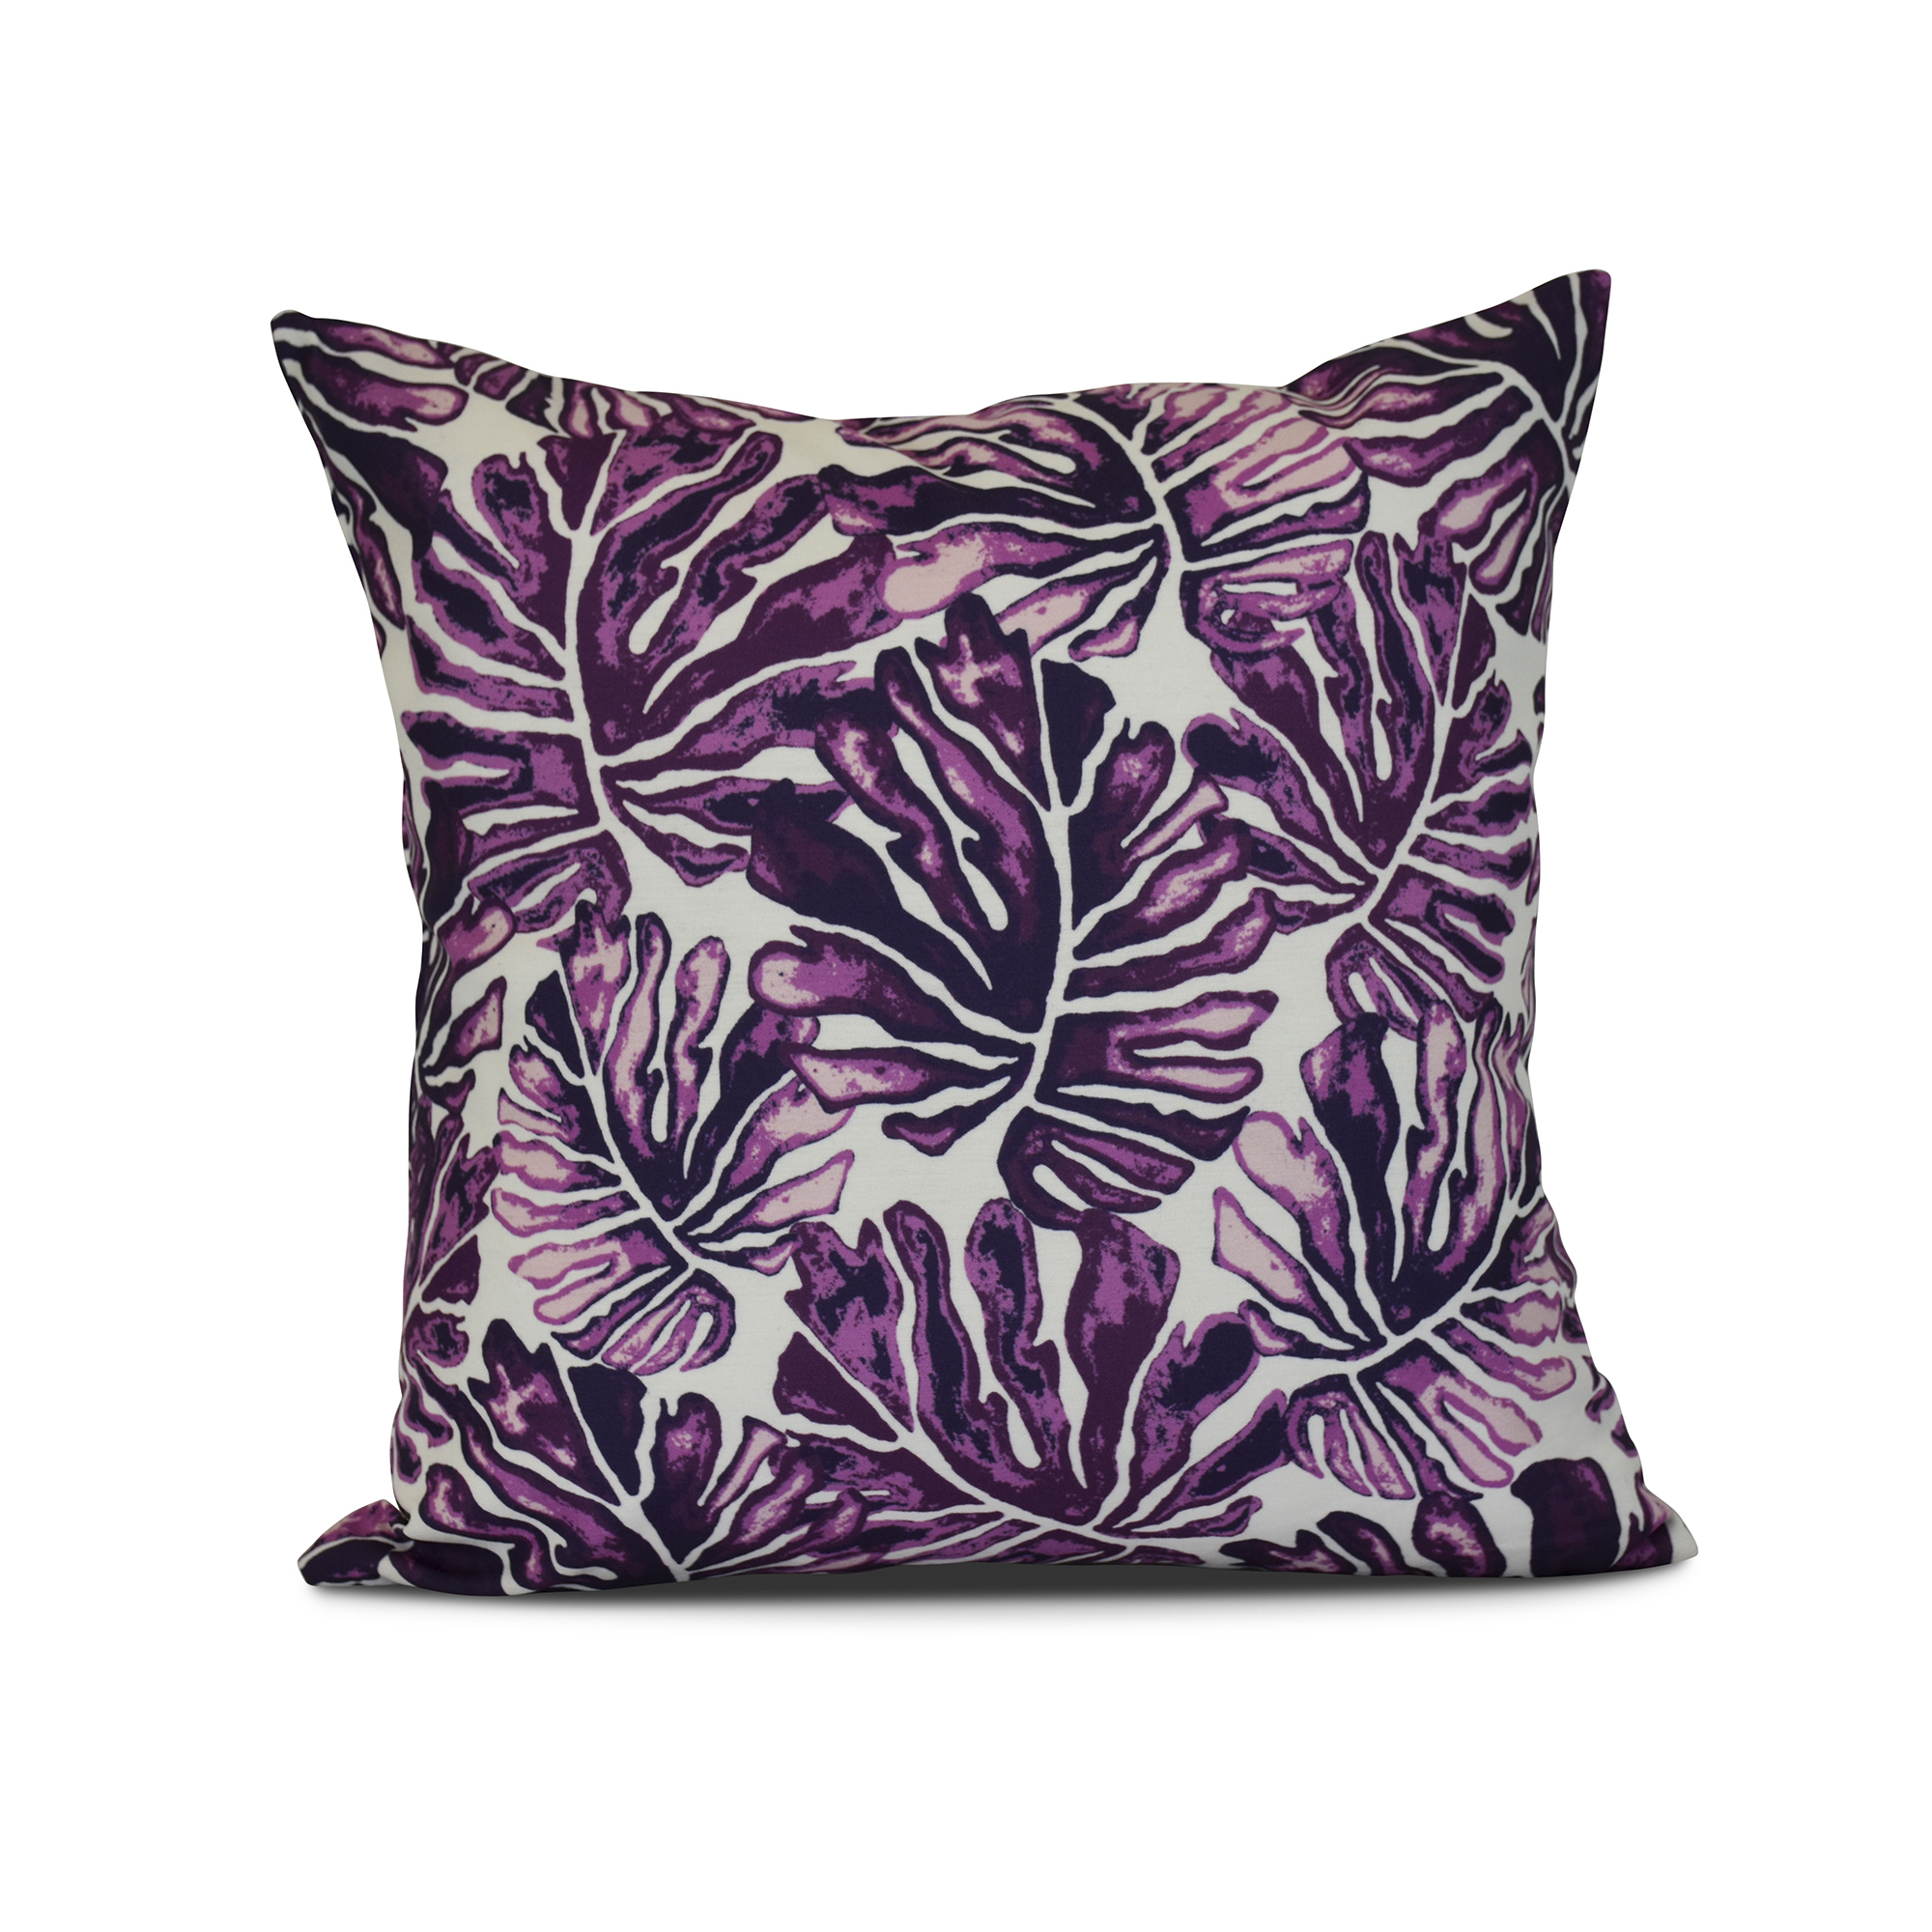 Contemporary Home Living 26" Purple Throw Pillow with Palm Leaves Design - Down Alternative Filler